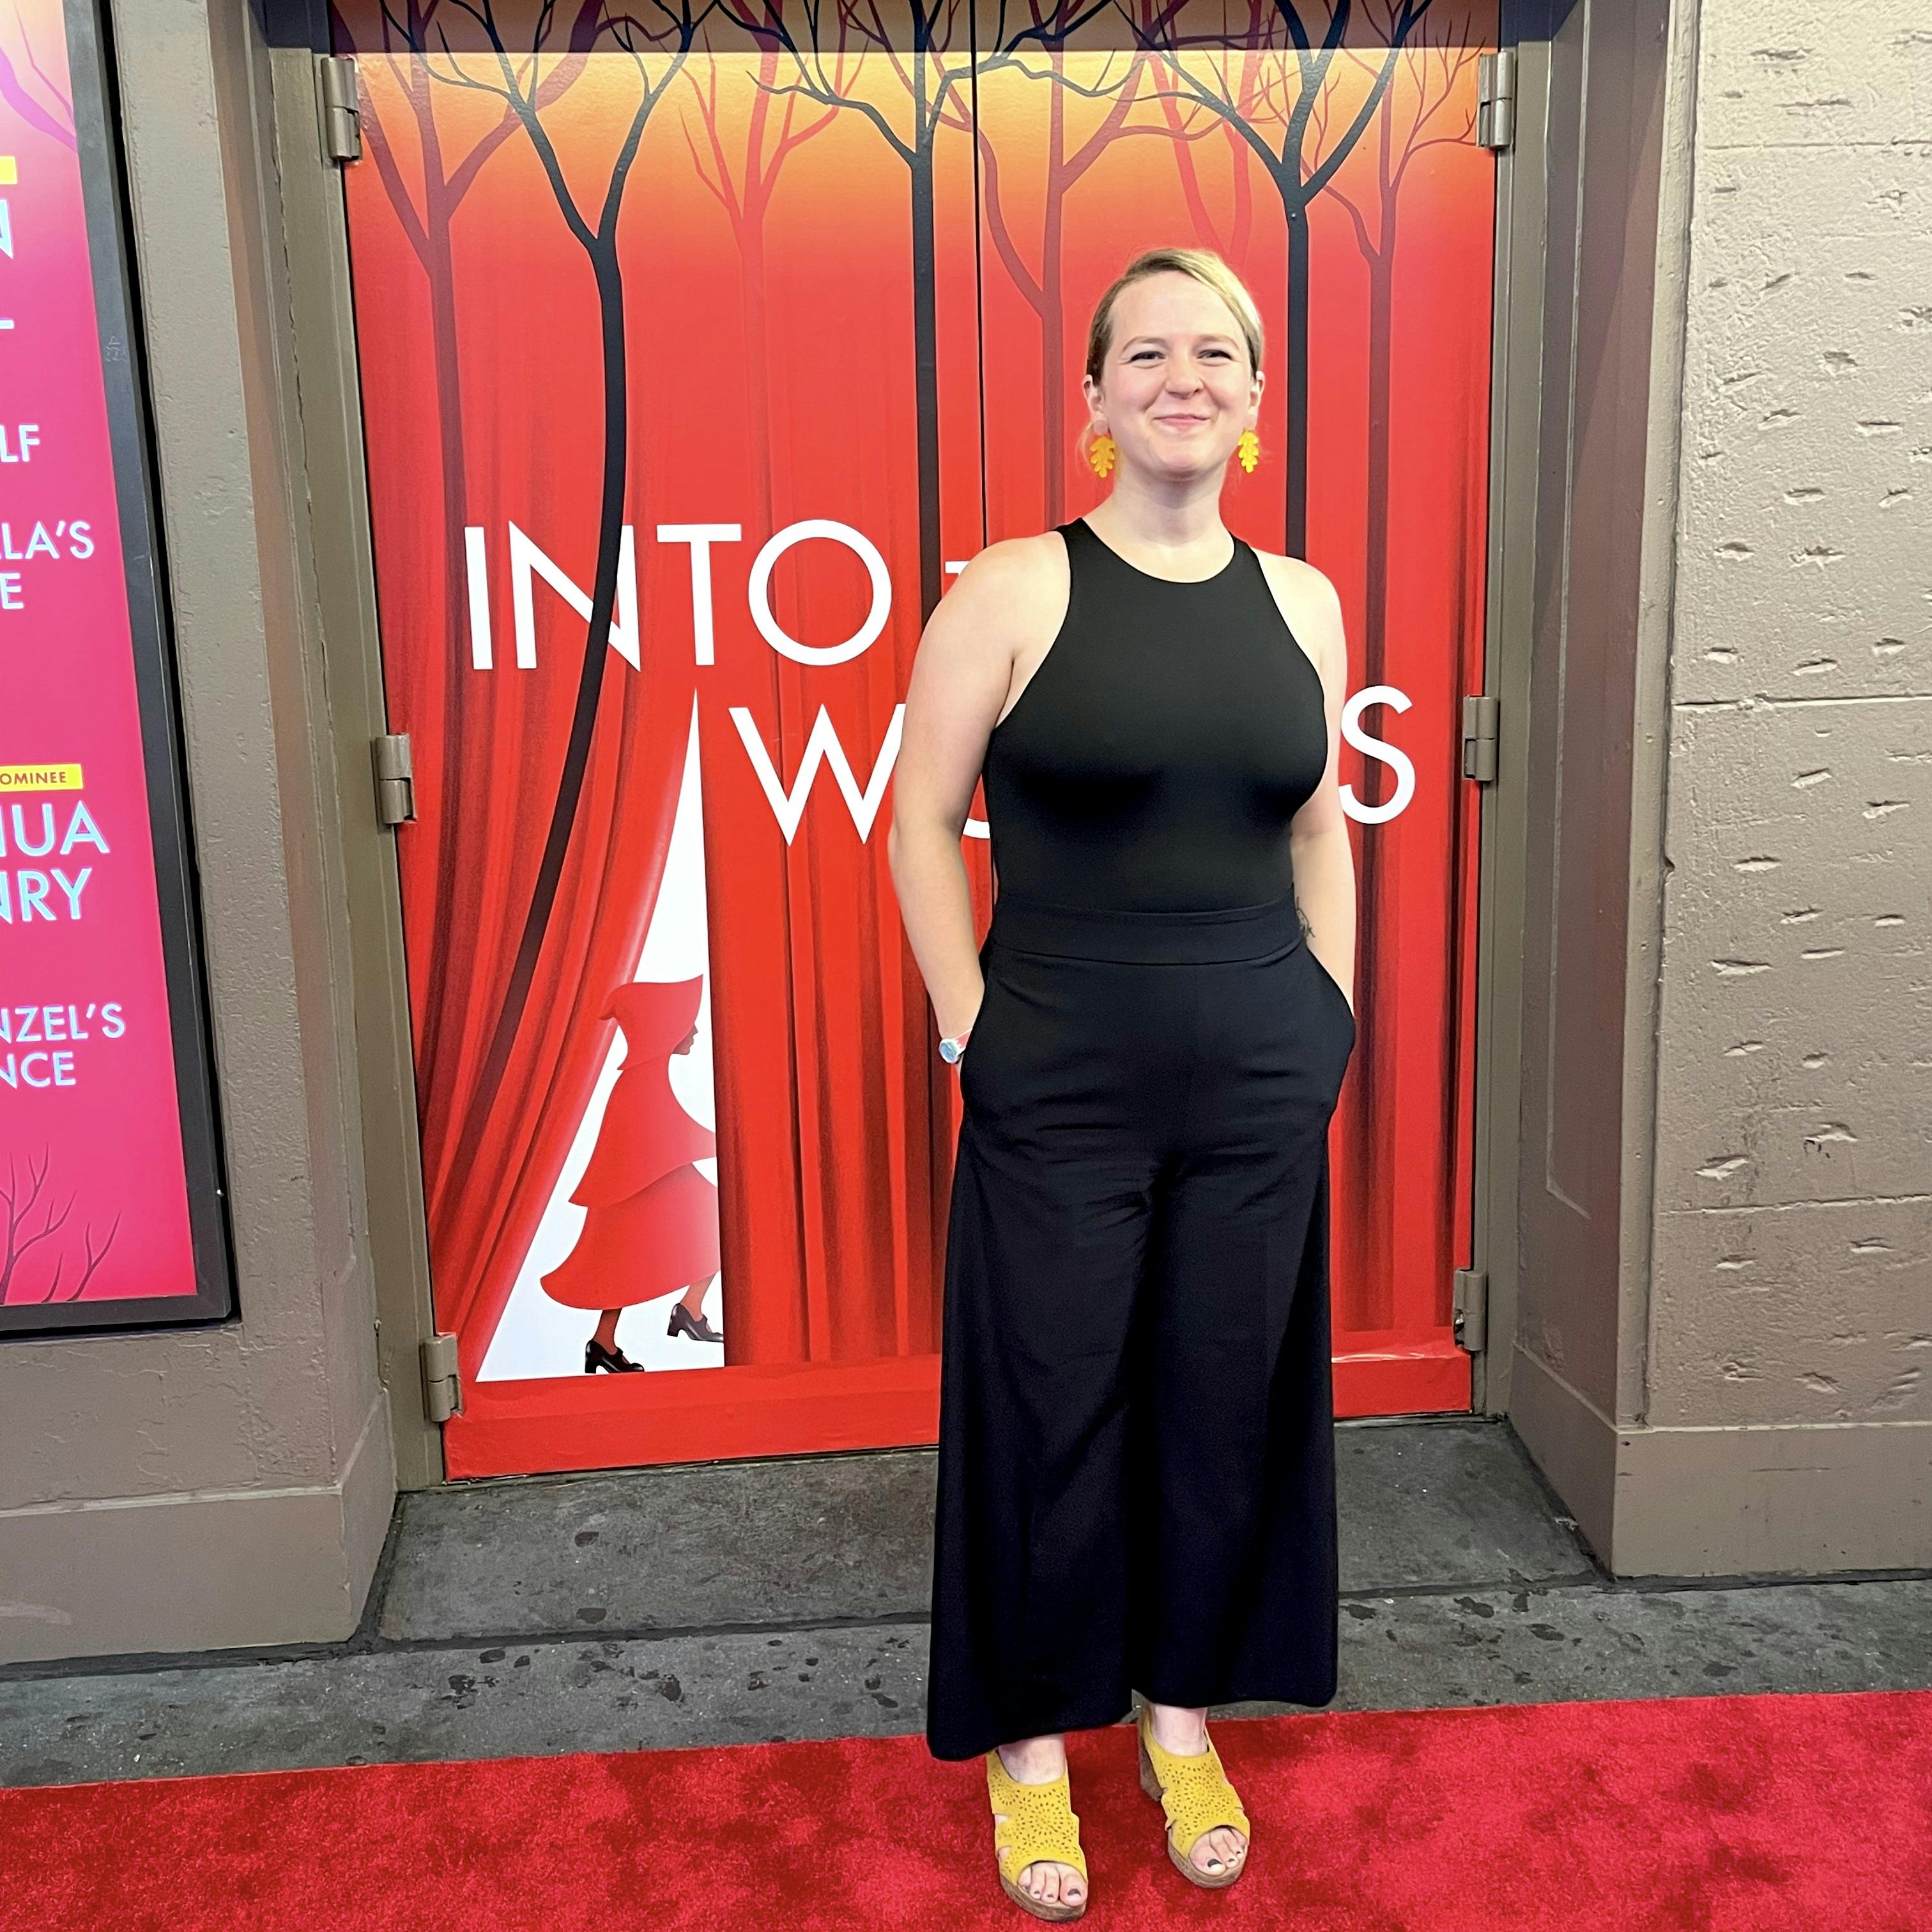 Into The Woods Opening Night Emily Walton